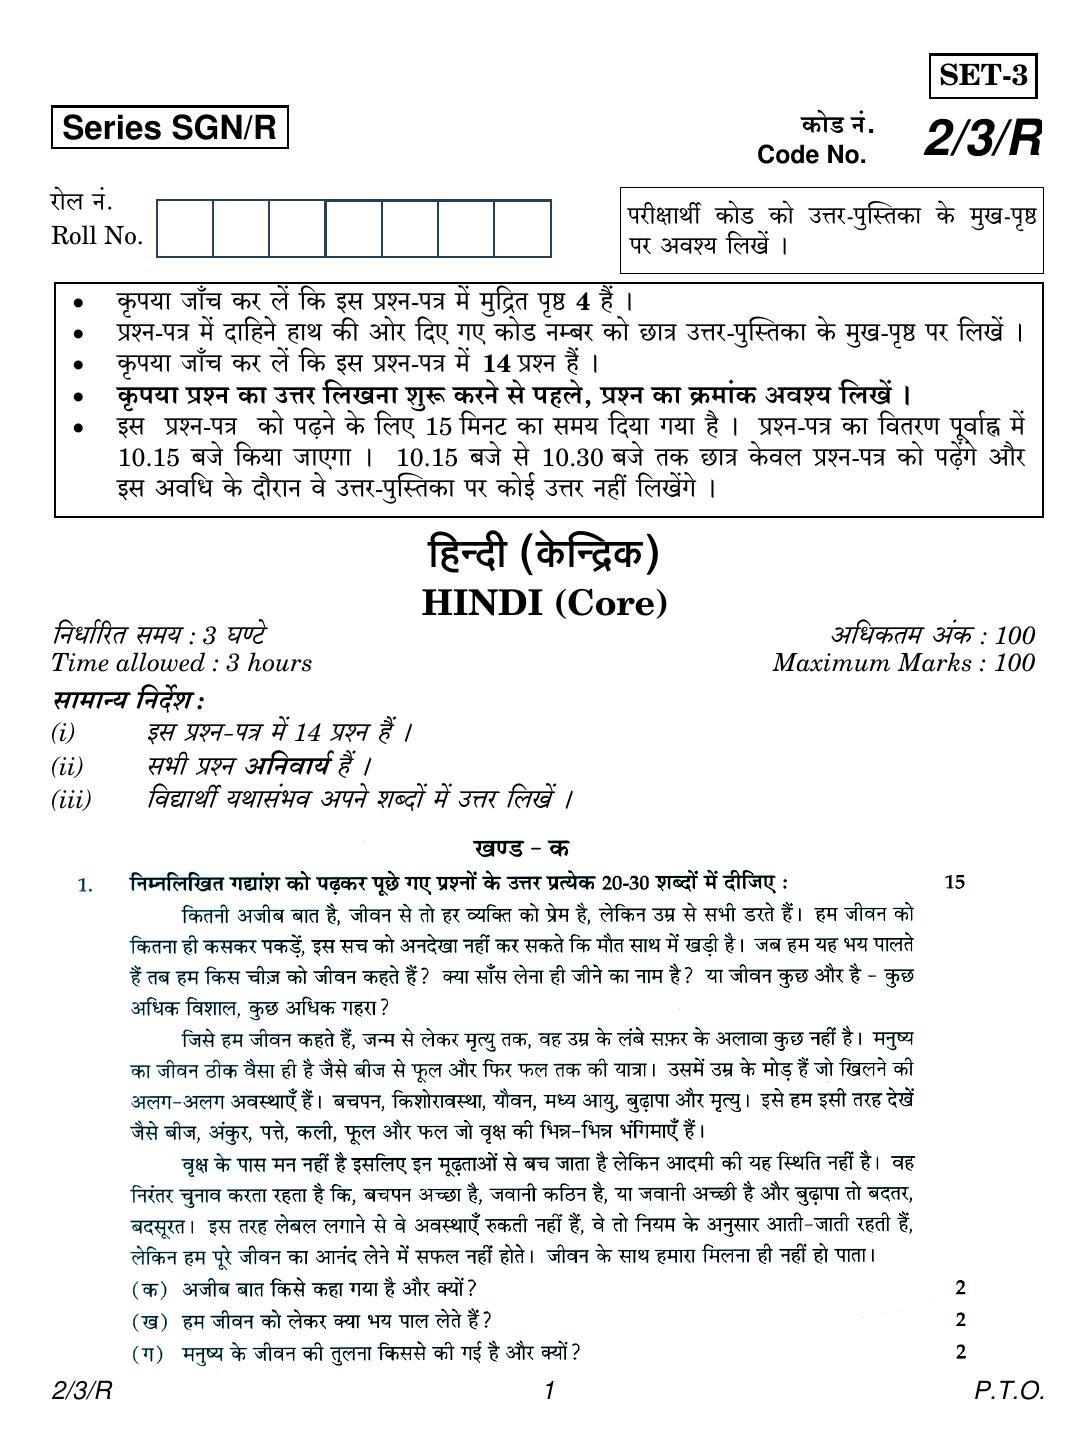 CBSE Class 12 2-3R HINDI CORE (SGN) 2018 Question Paper - Page 1